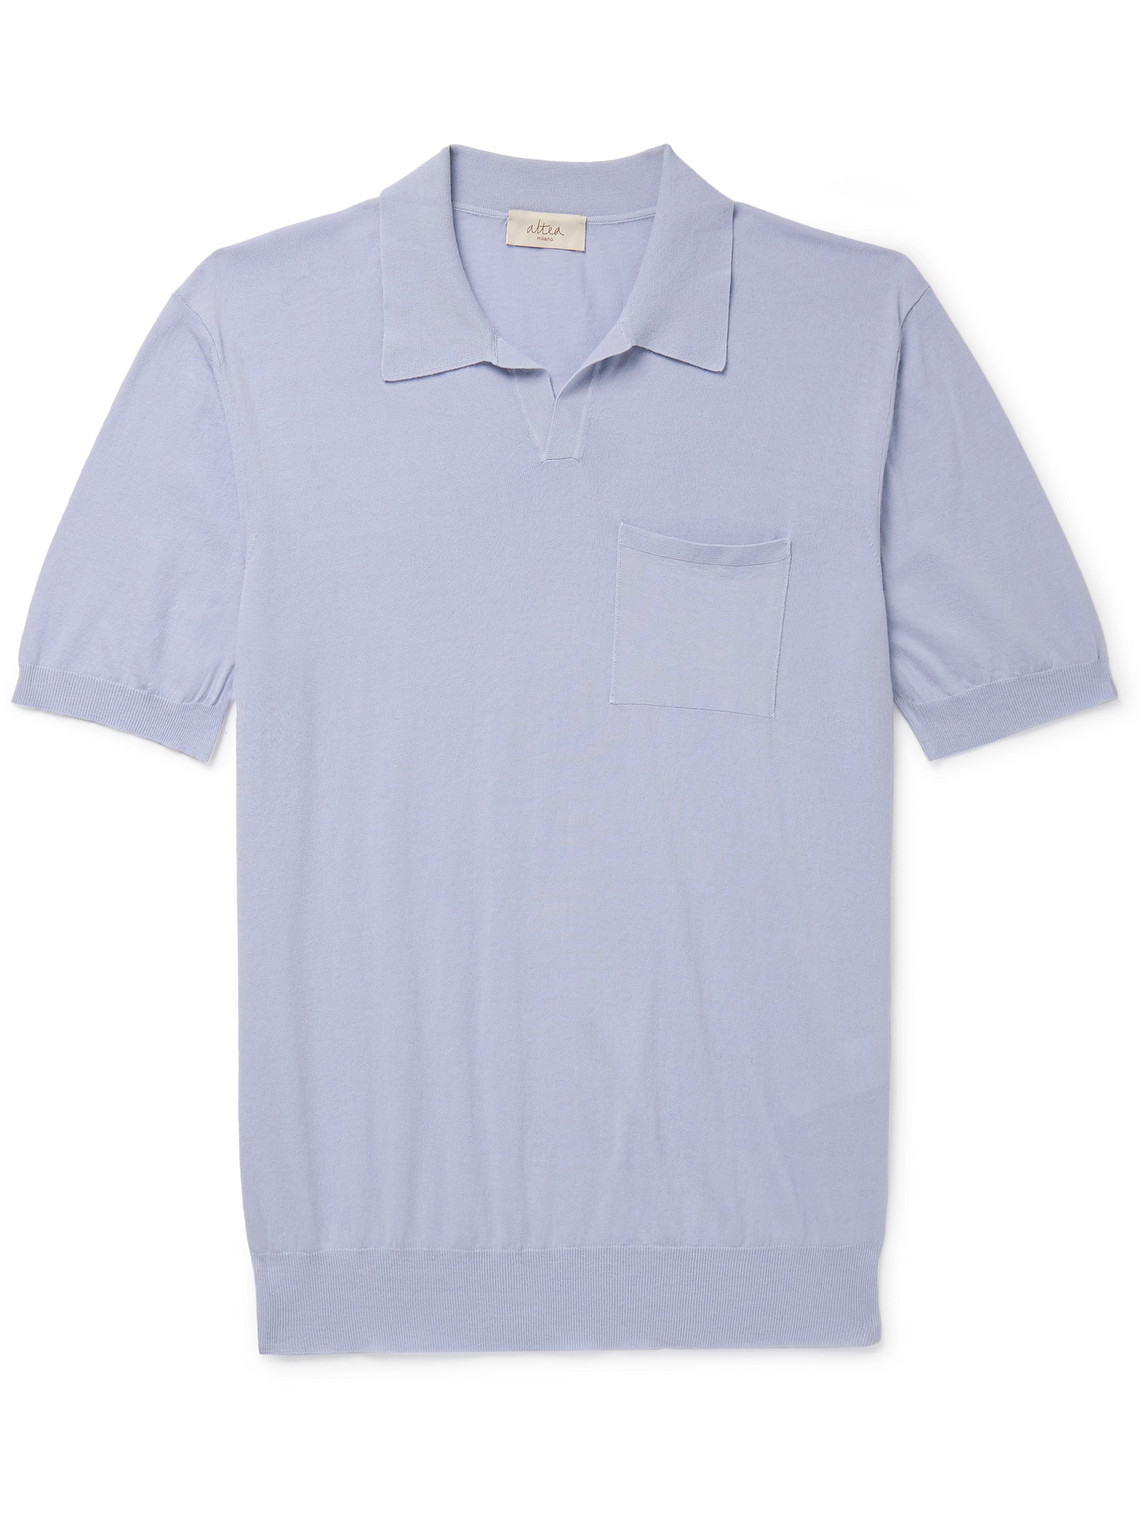 Altea Slim-fit Garment-dyed Cotton Polo Shirt In Blue